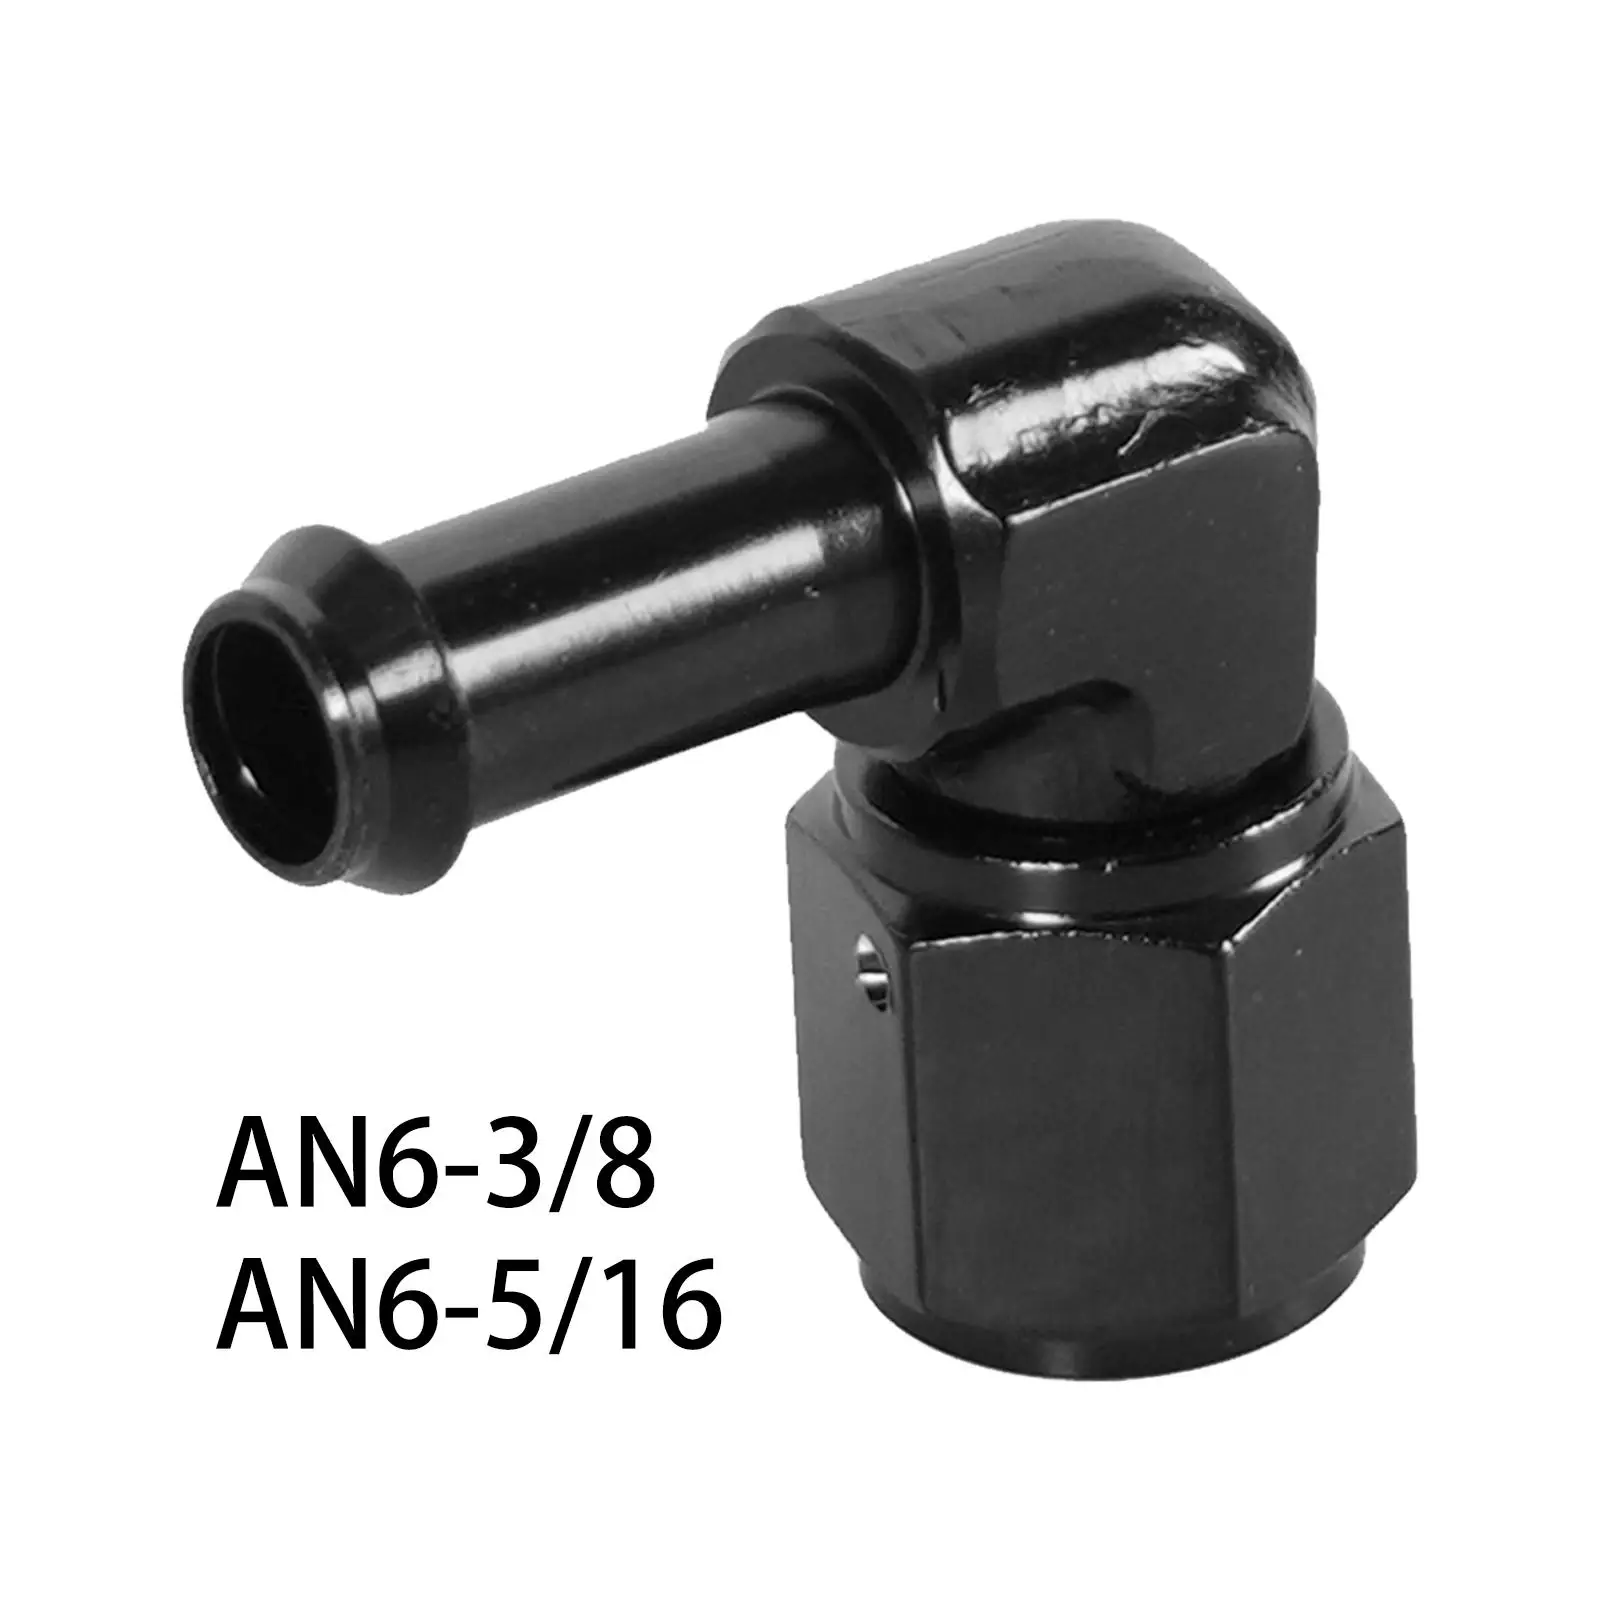 Aluminum Alloy 6AN Female Swivel Coupler 90 Degree Hose Barb Adapter Black Anodized Finish Easy to Install Accessories Component